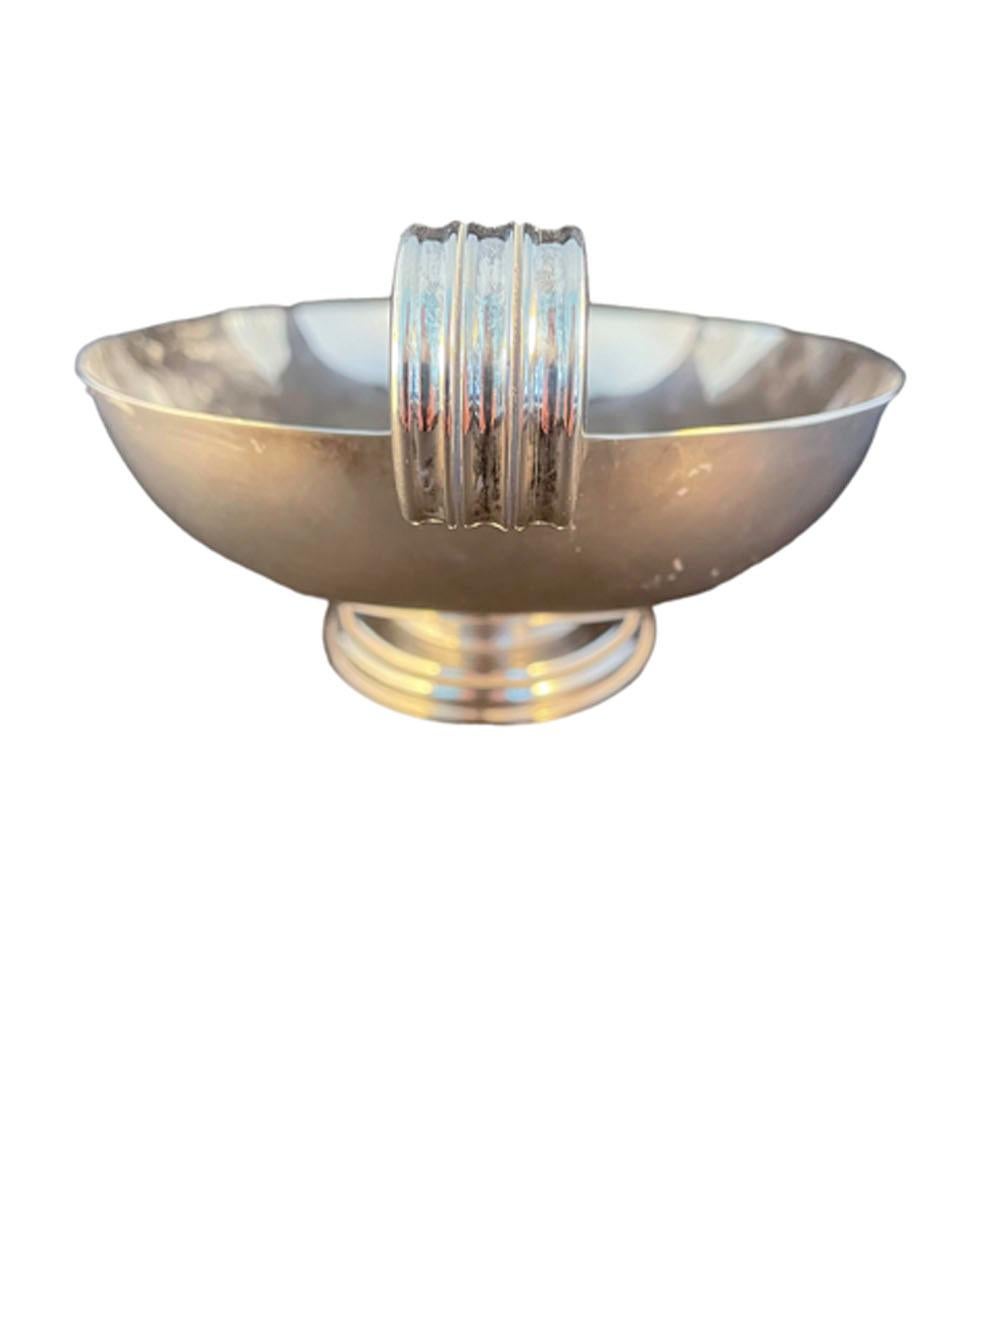 20th Century English, Art Deco, Silver Plate, Oval Footed Bowl with Circular Reeded Handles